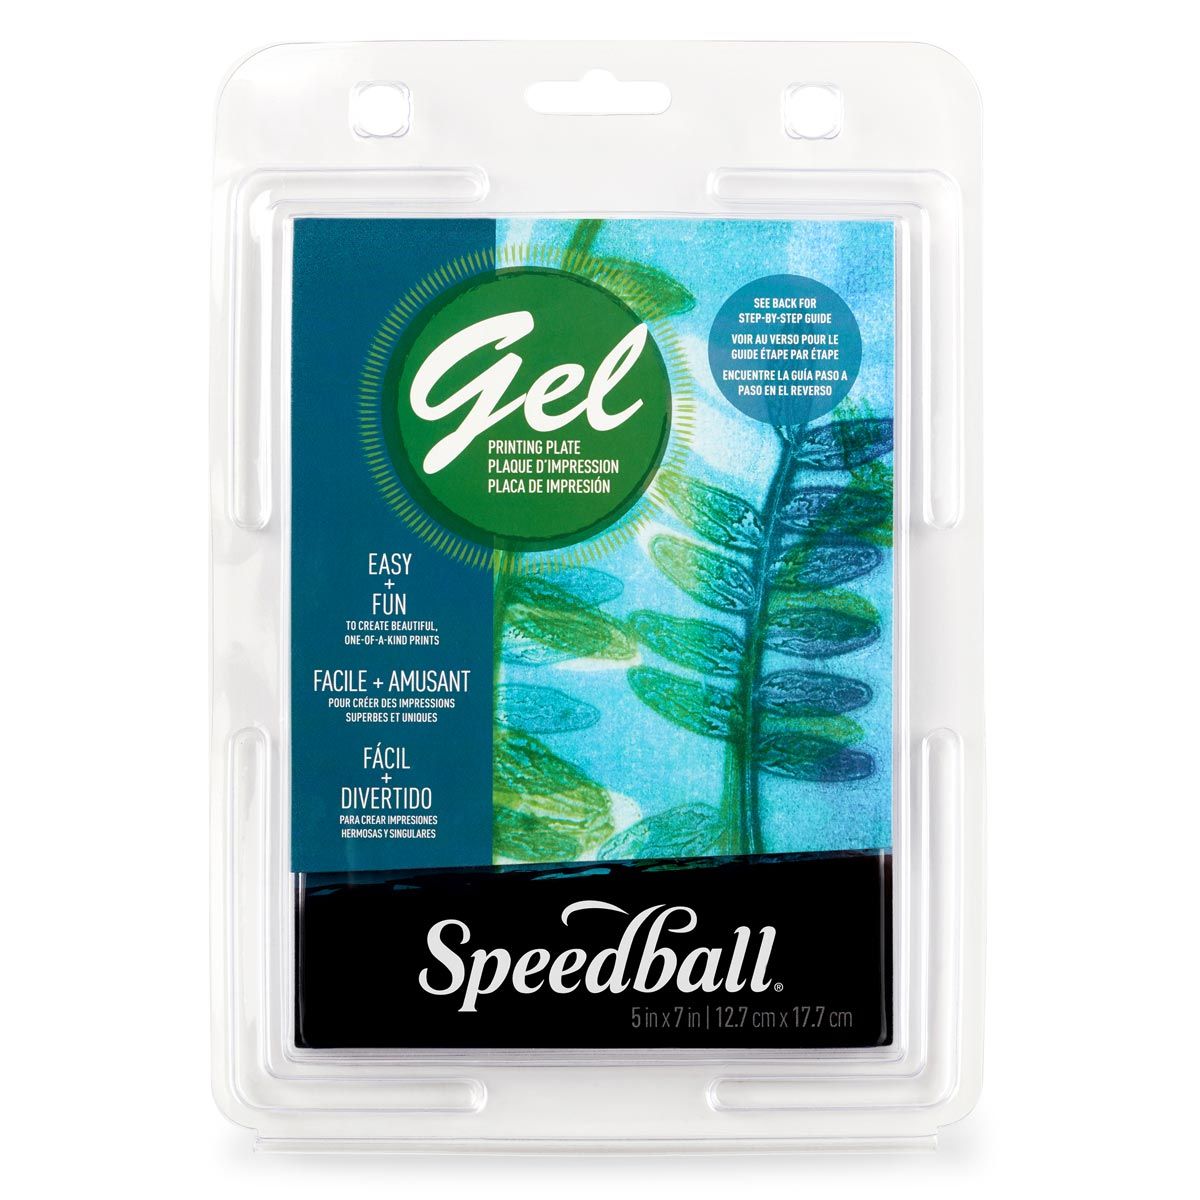 Speedball Gel Printing Plate 5 x 7 Inches